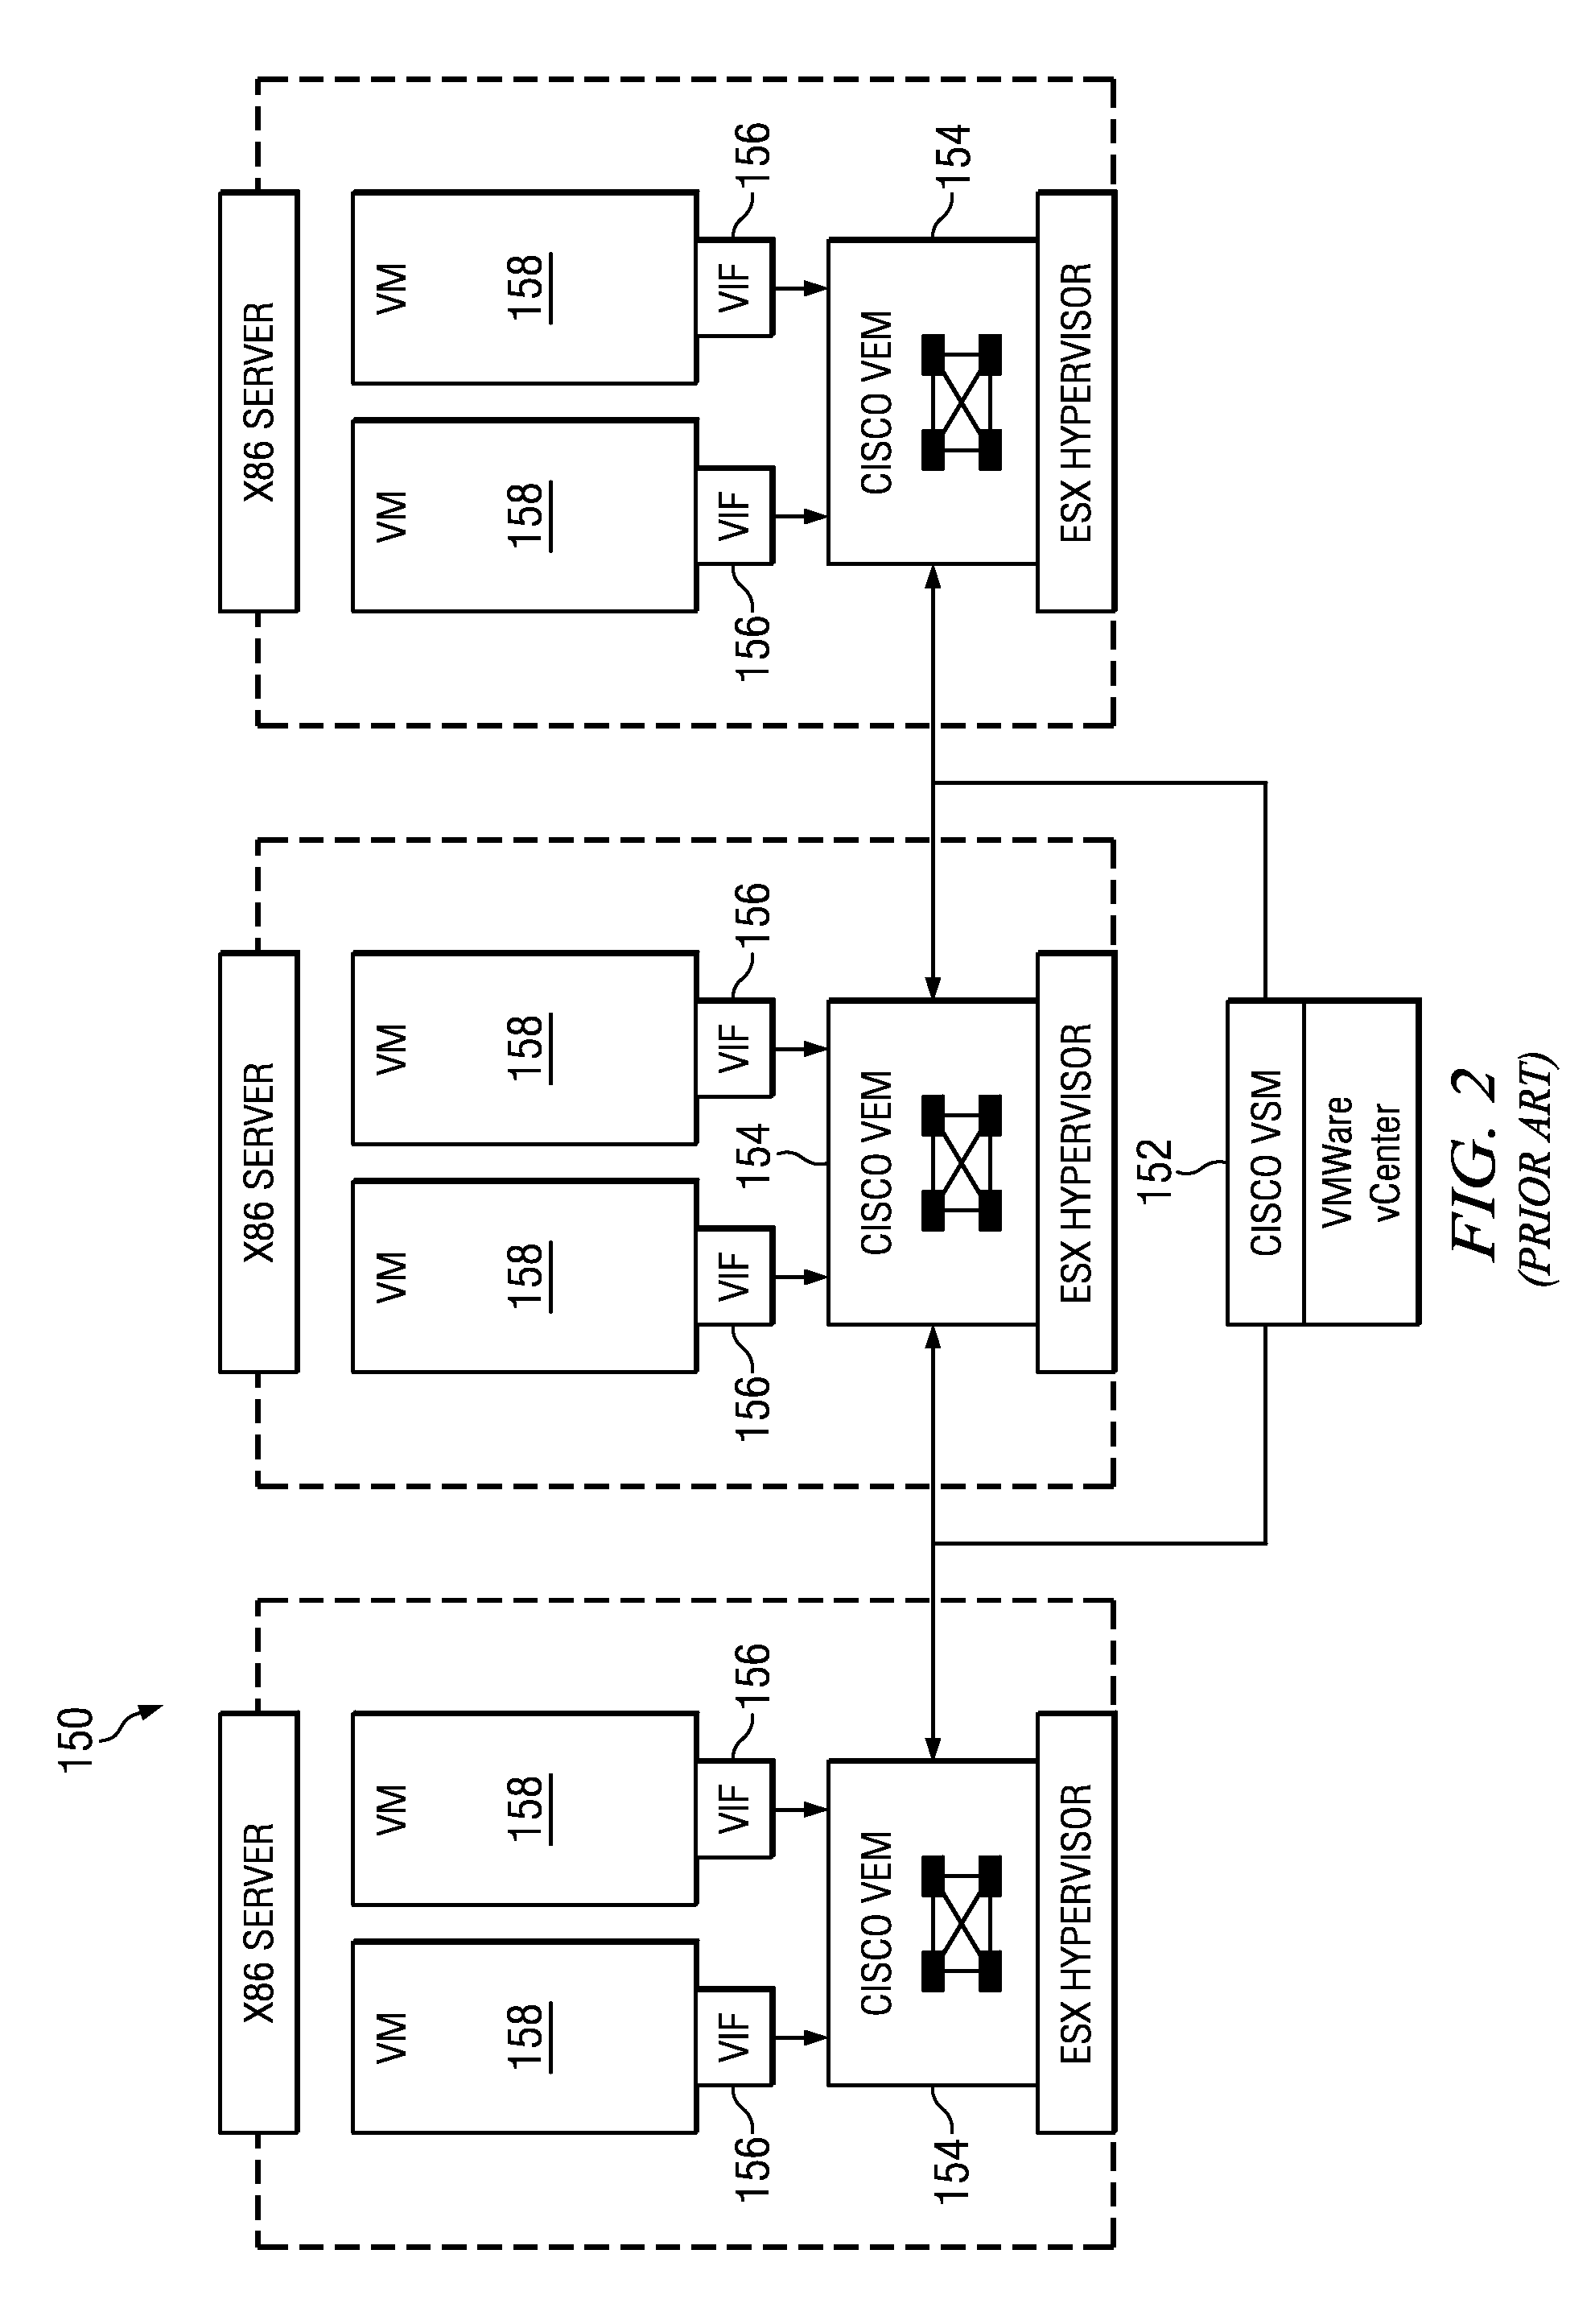 System and Method for an In-Server Virtual Switch